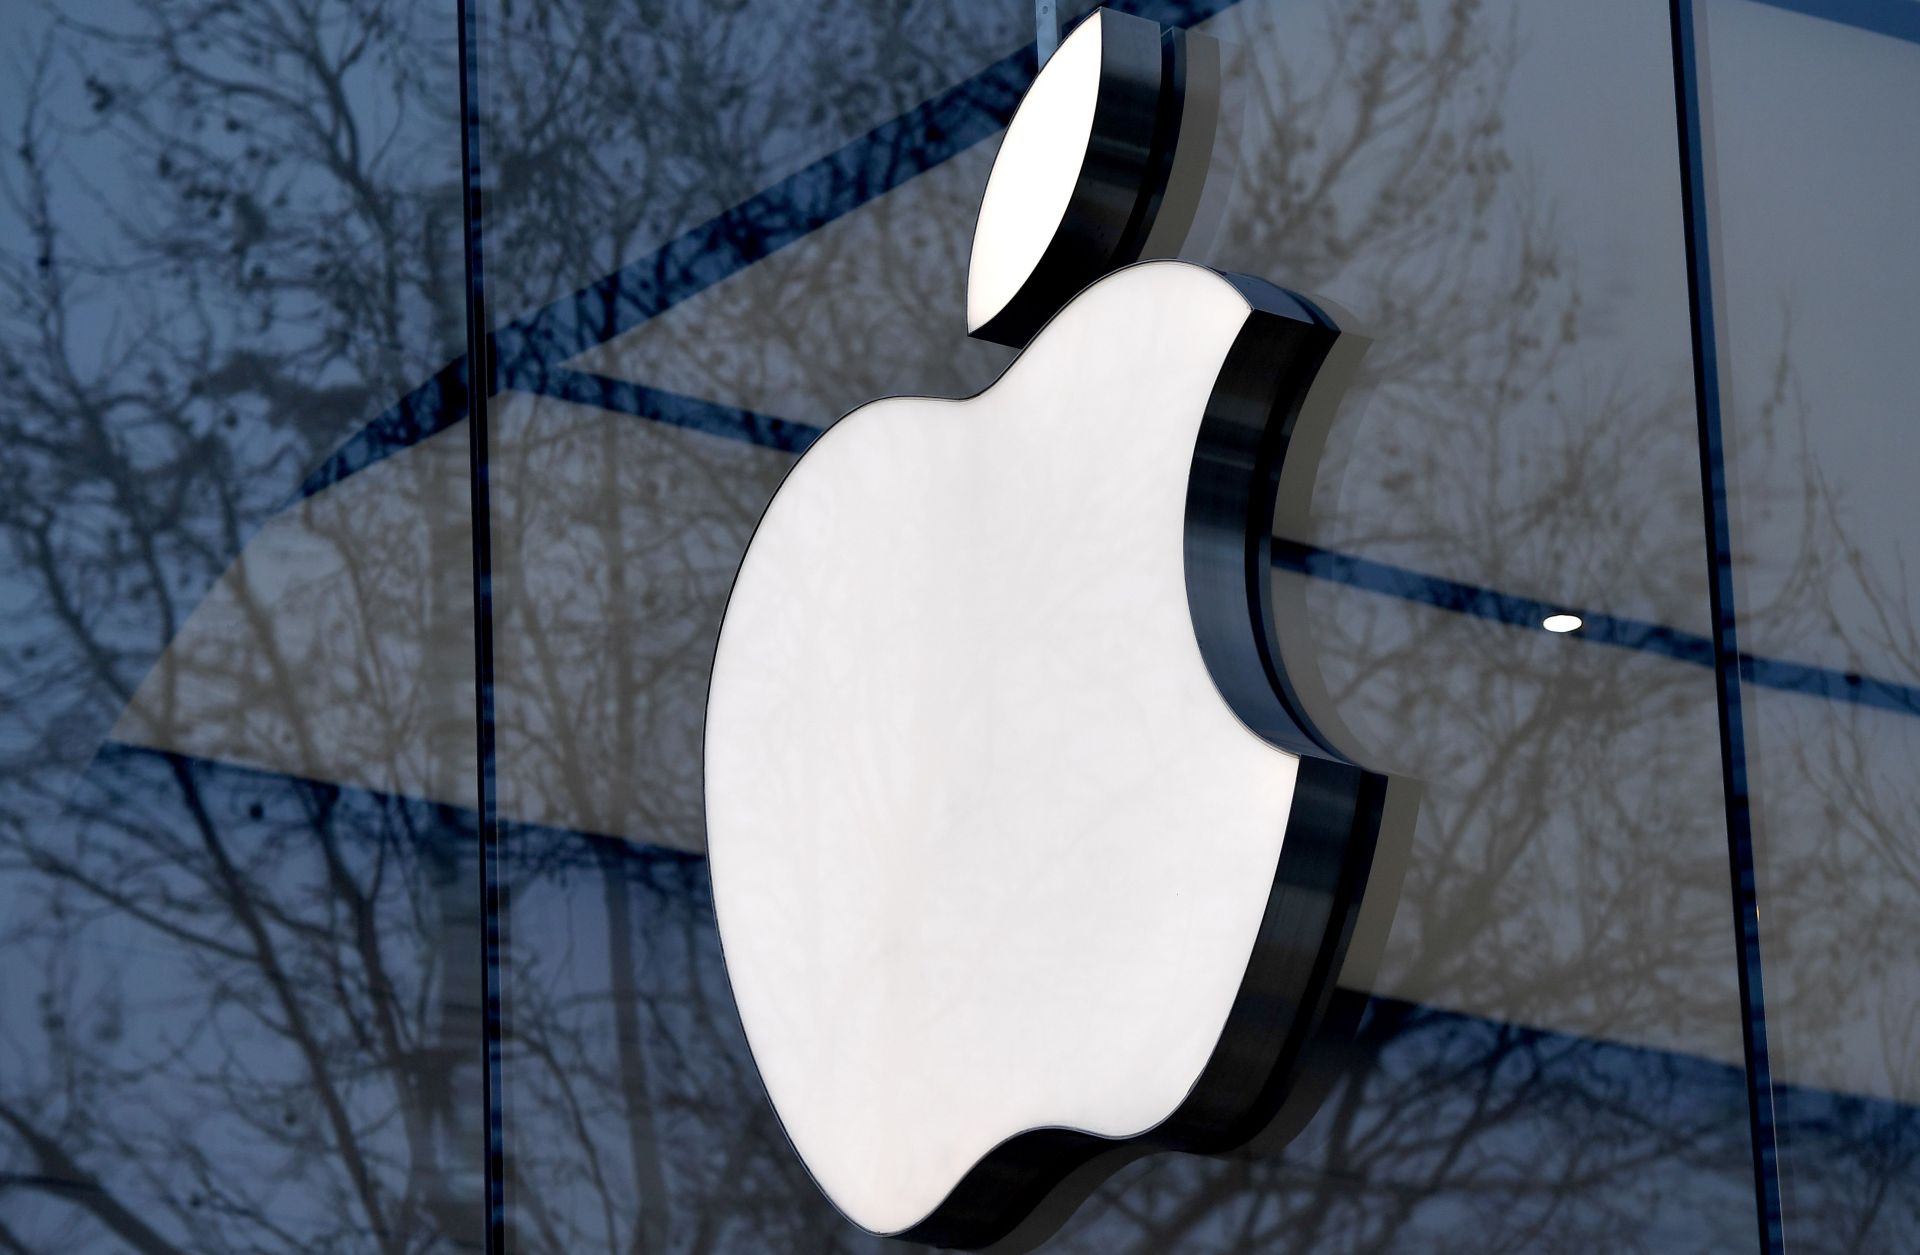 The logo for Apple Inc. adorns a storefront in the Belgian capital.